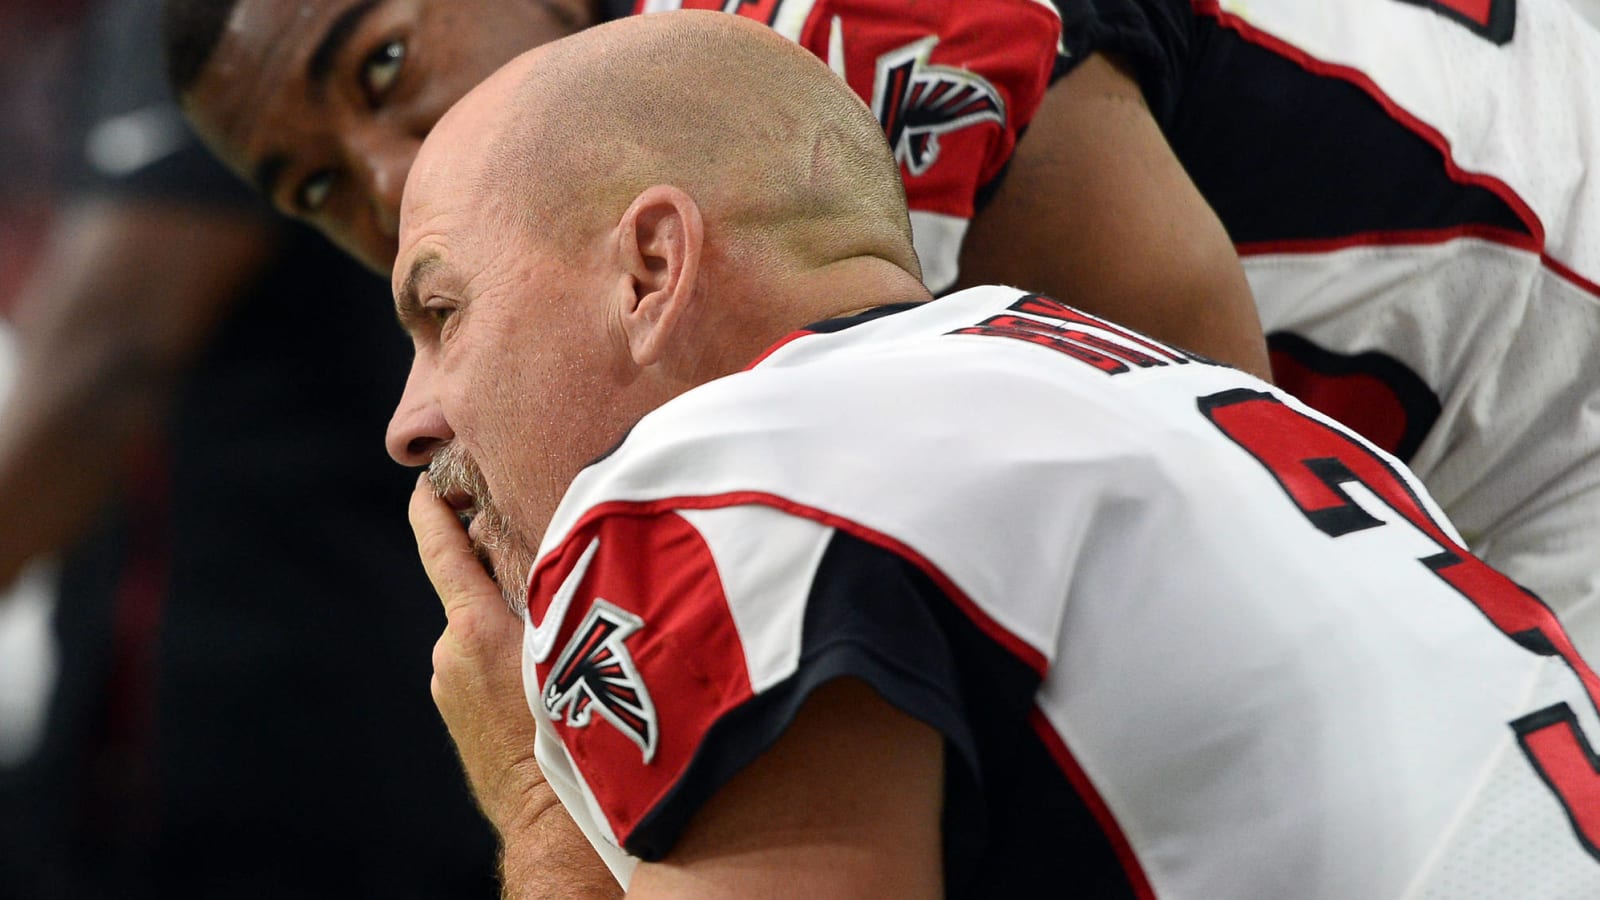 Matt Bryant had the saddest reaction after missing crucial extra point